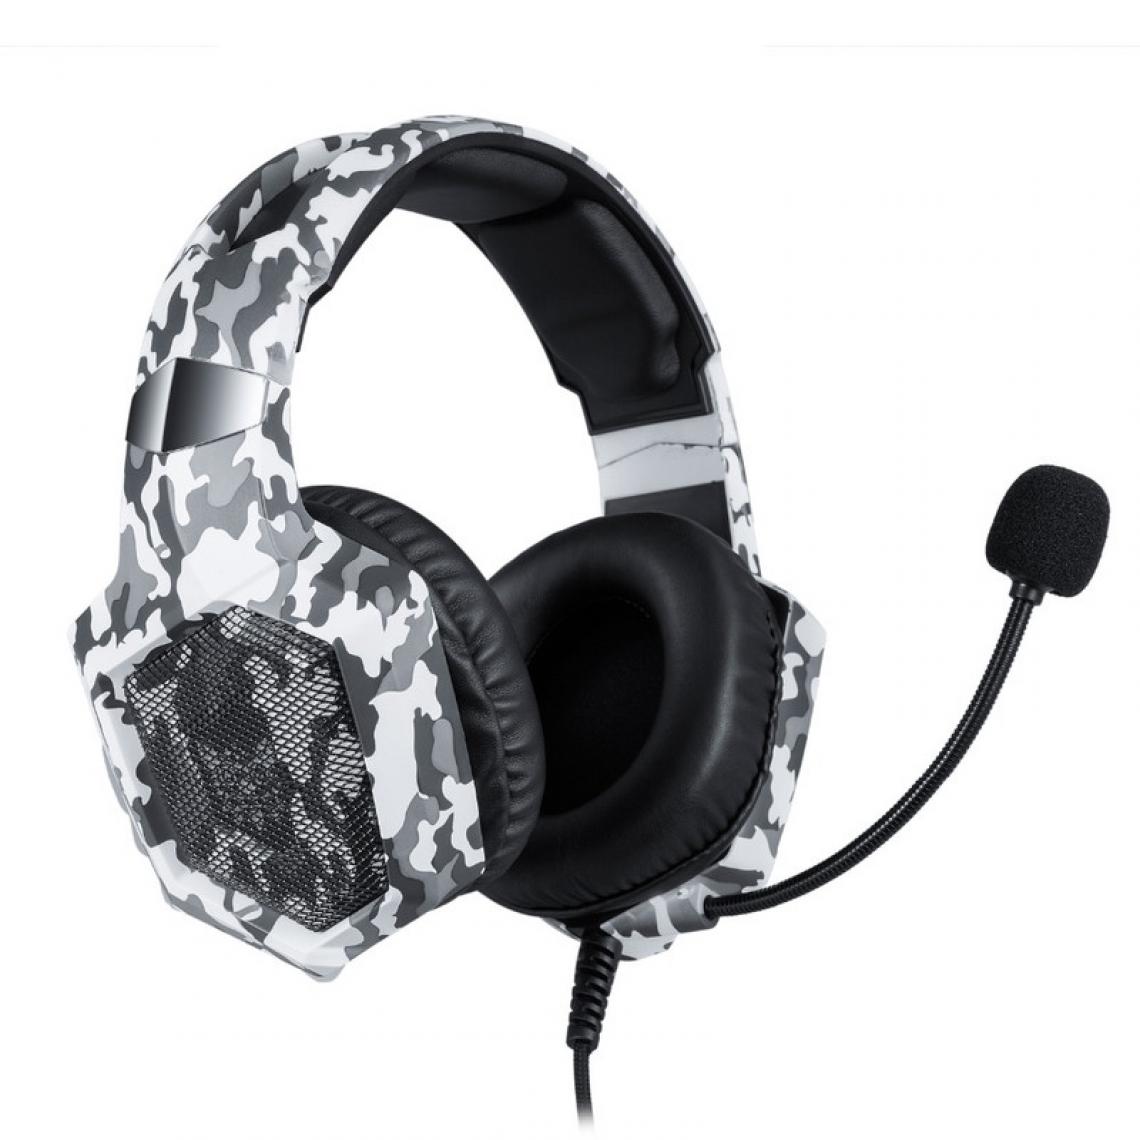 ele ELEOPTION - K8 Camouflage Headset Wired PC Gamer Stereo Gaming Headphones,White - Micro-Casque